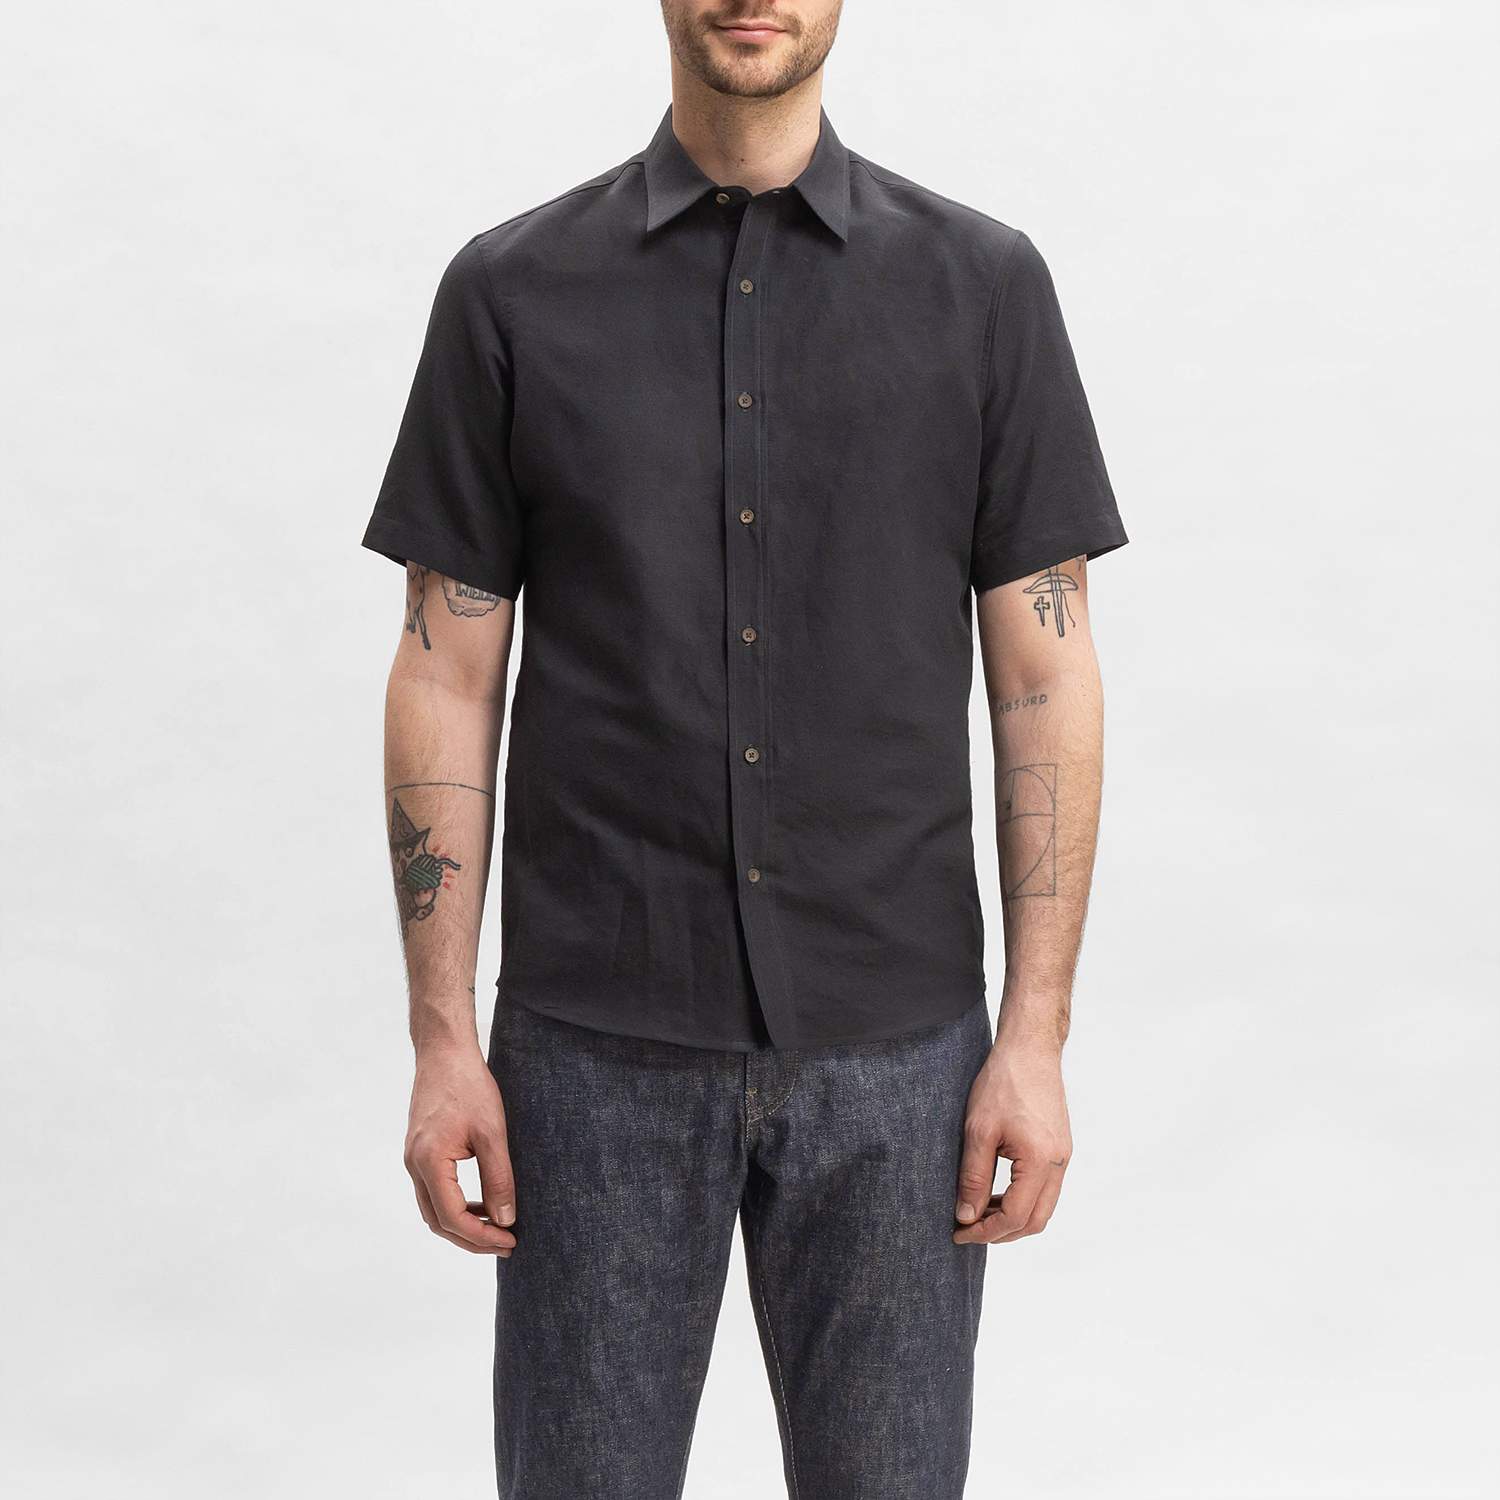 Early Bird Black - Shirt made in USA from Portuguese fabric